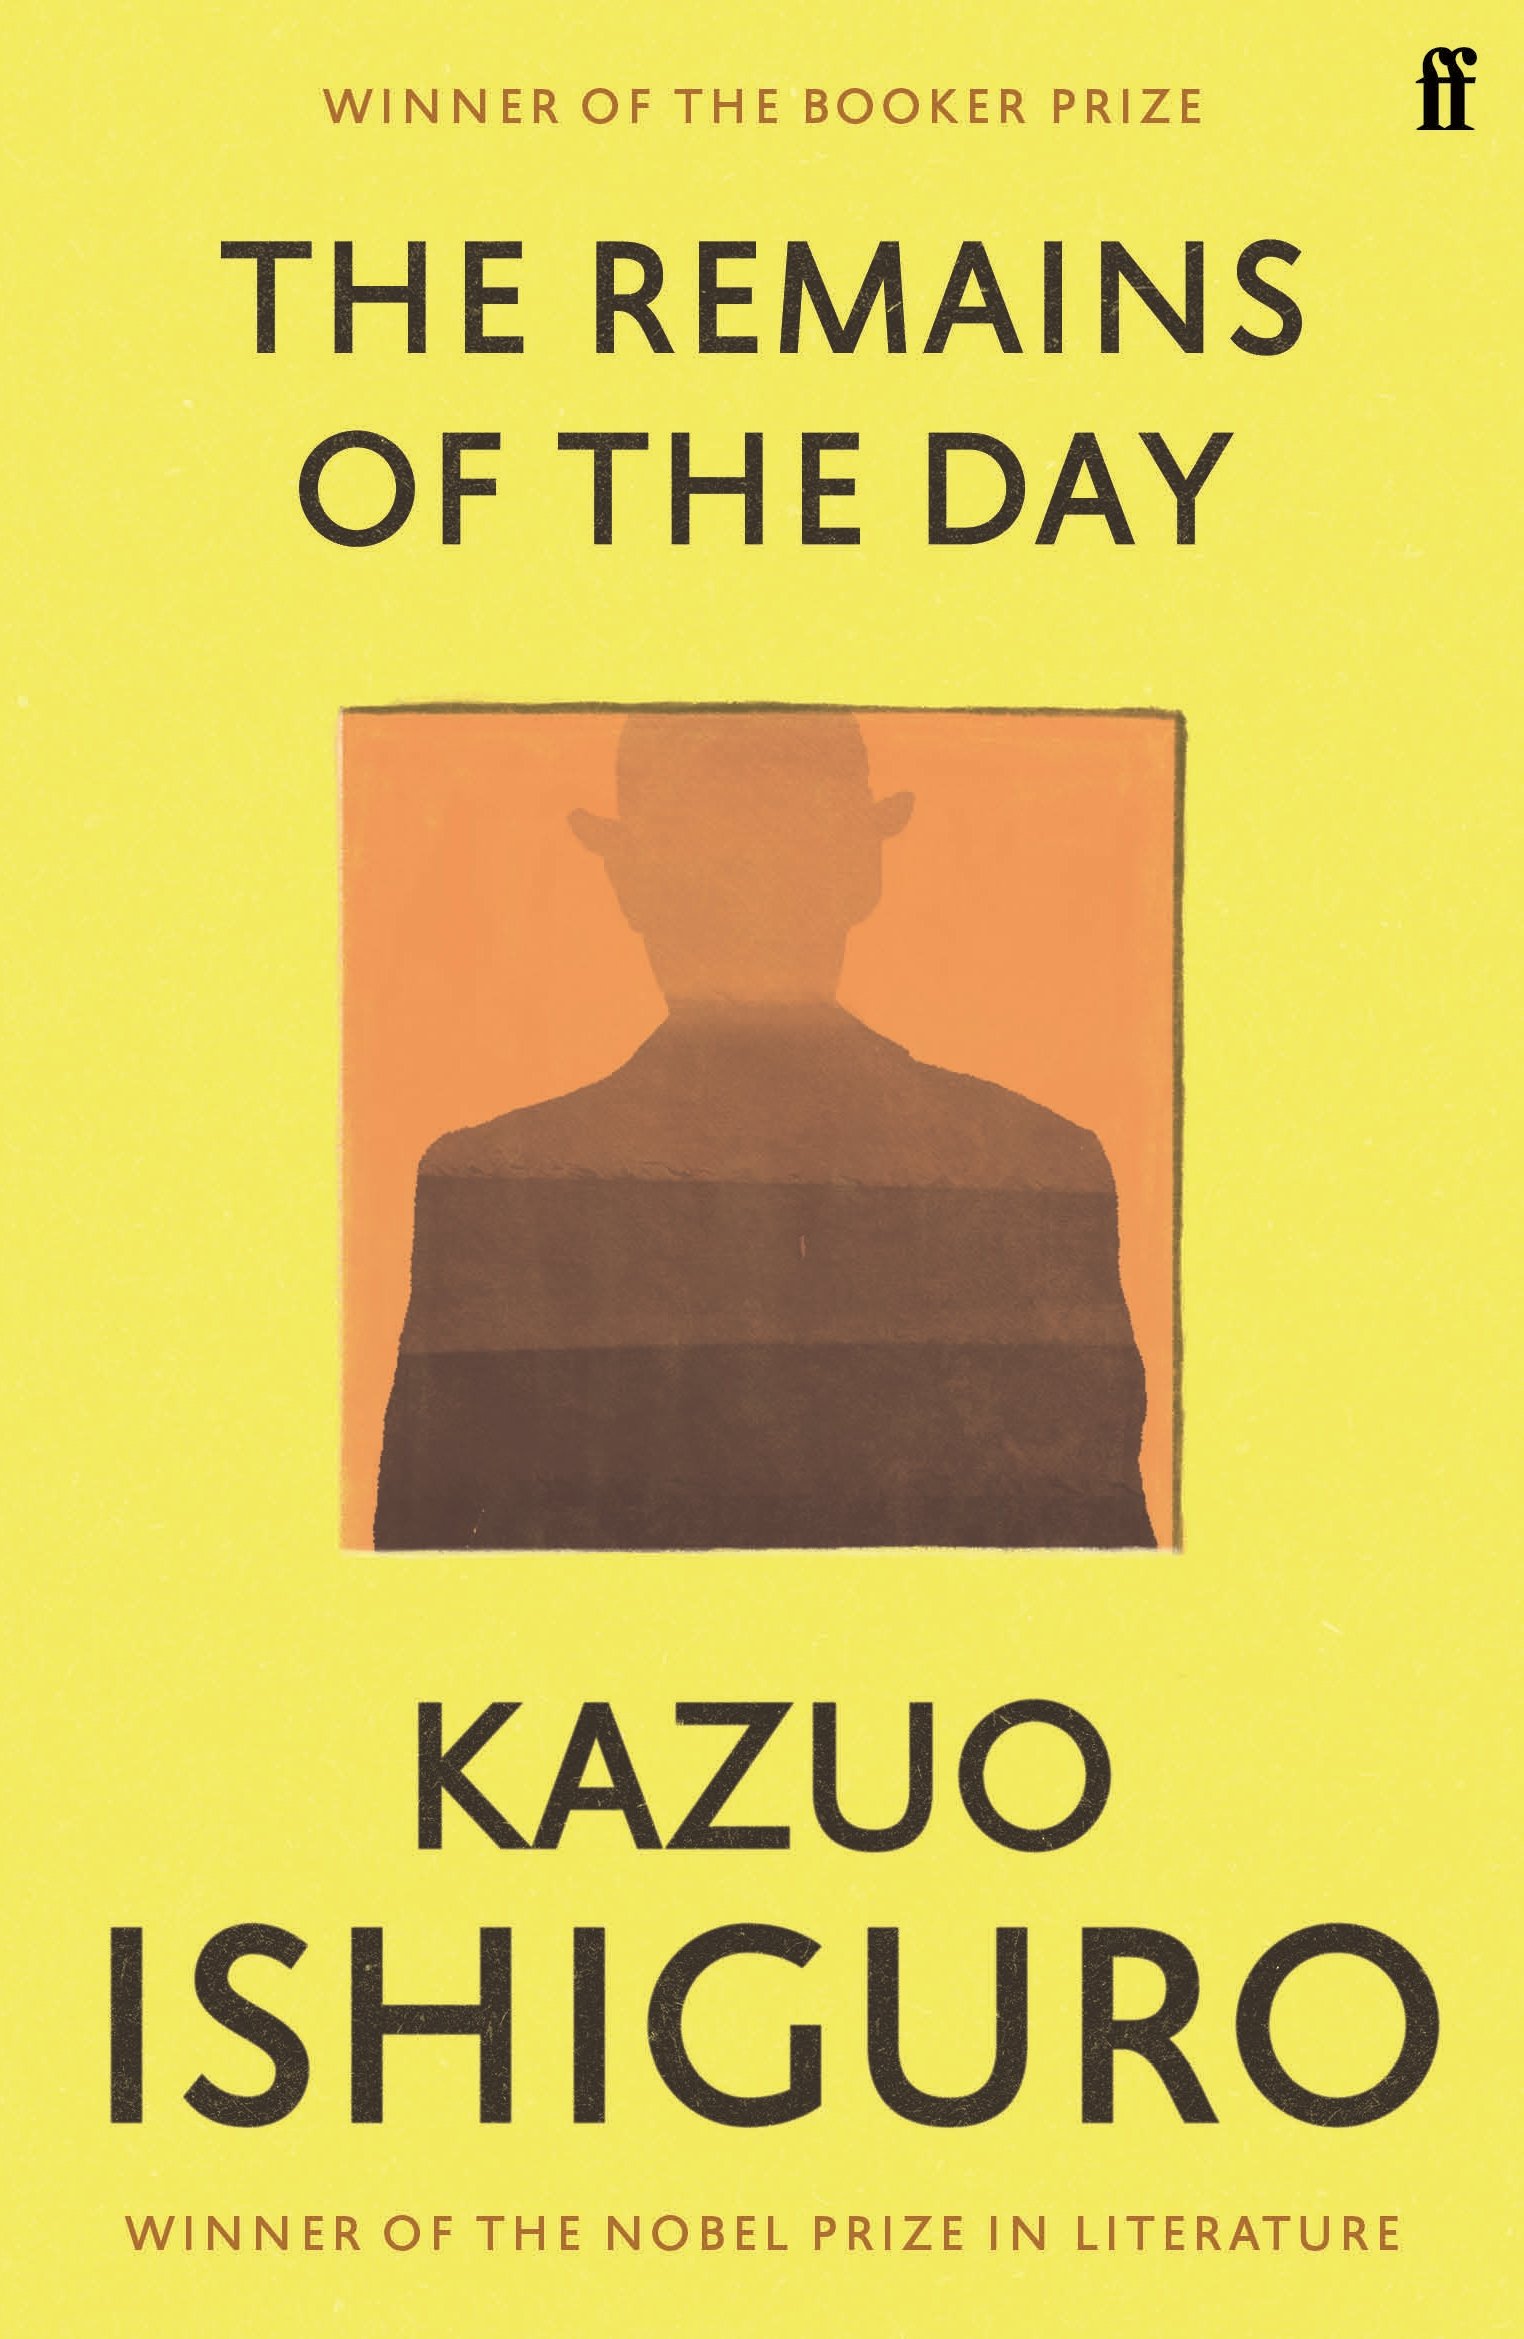 Kazuo　Shop　Day　of　by　Books　Ishiguro　the　Remains　The　Faber